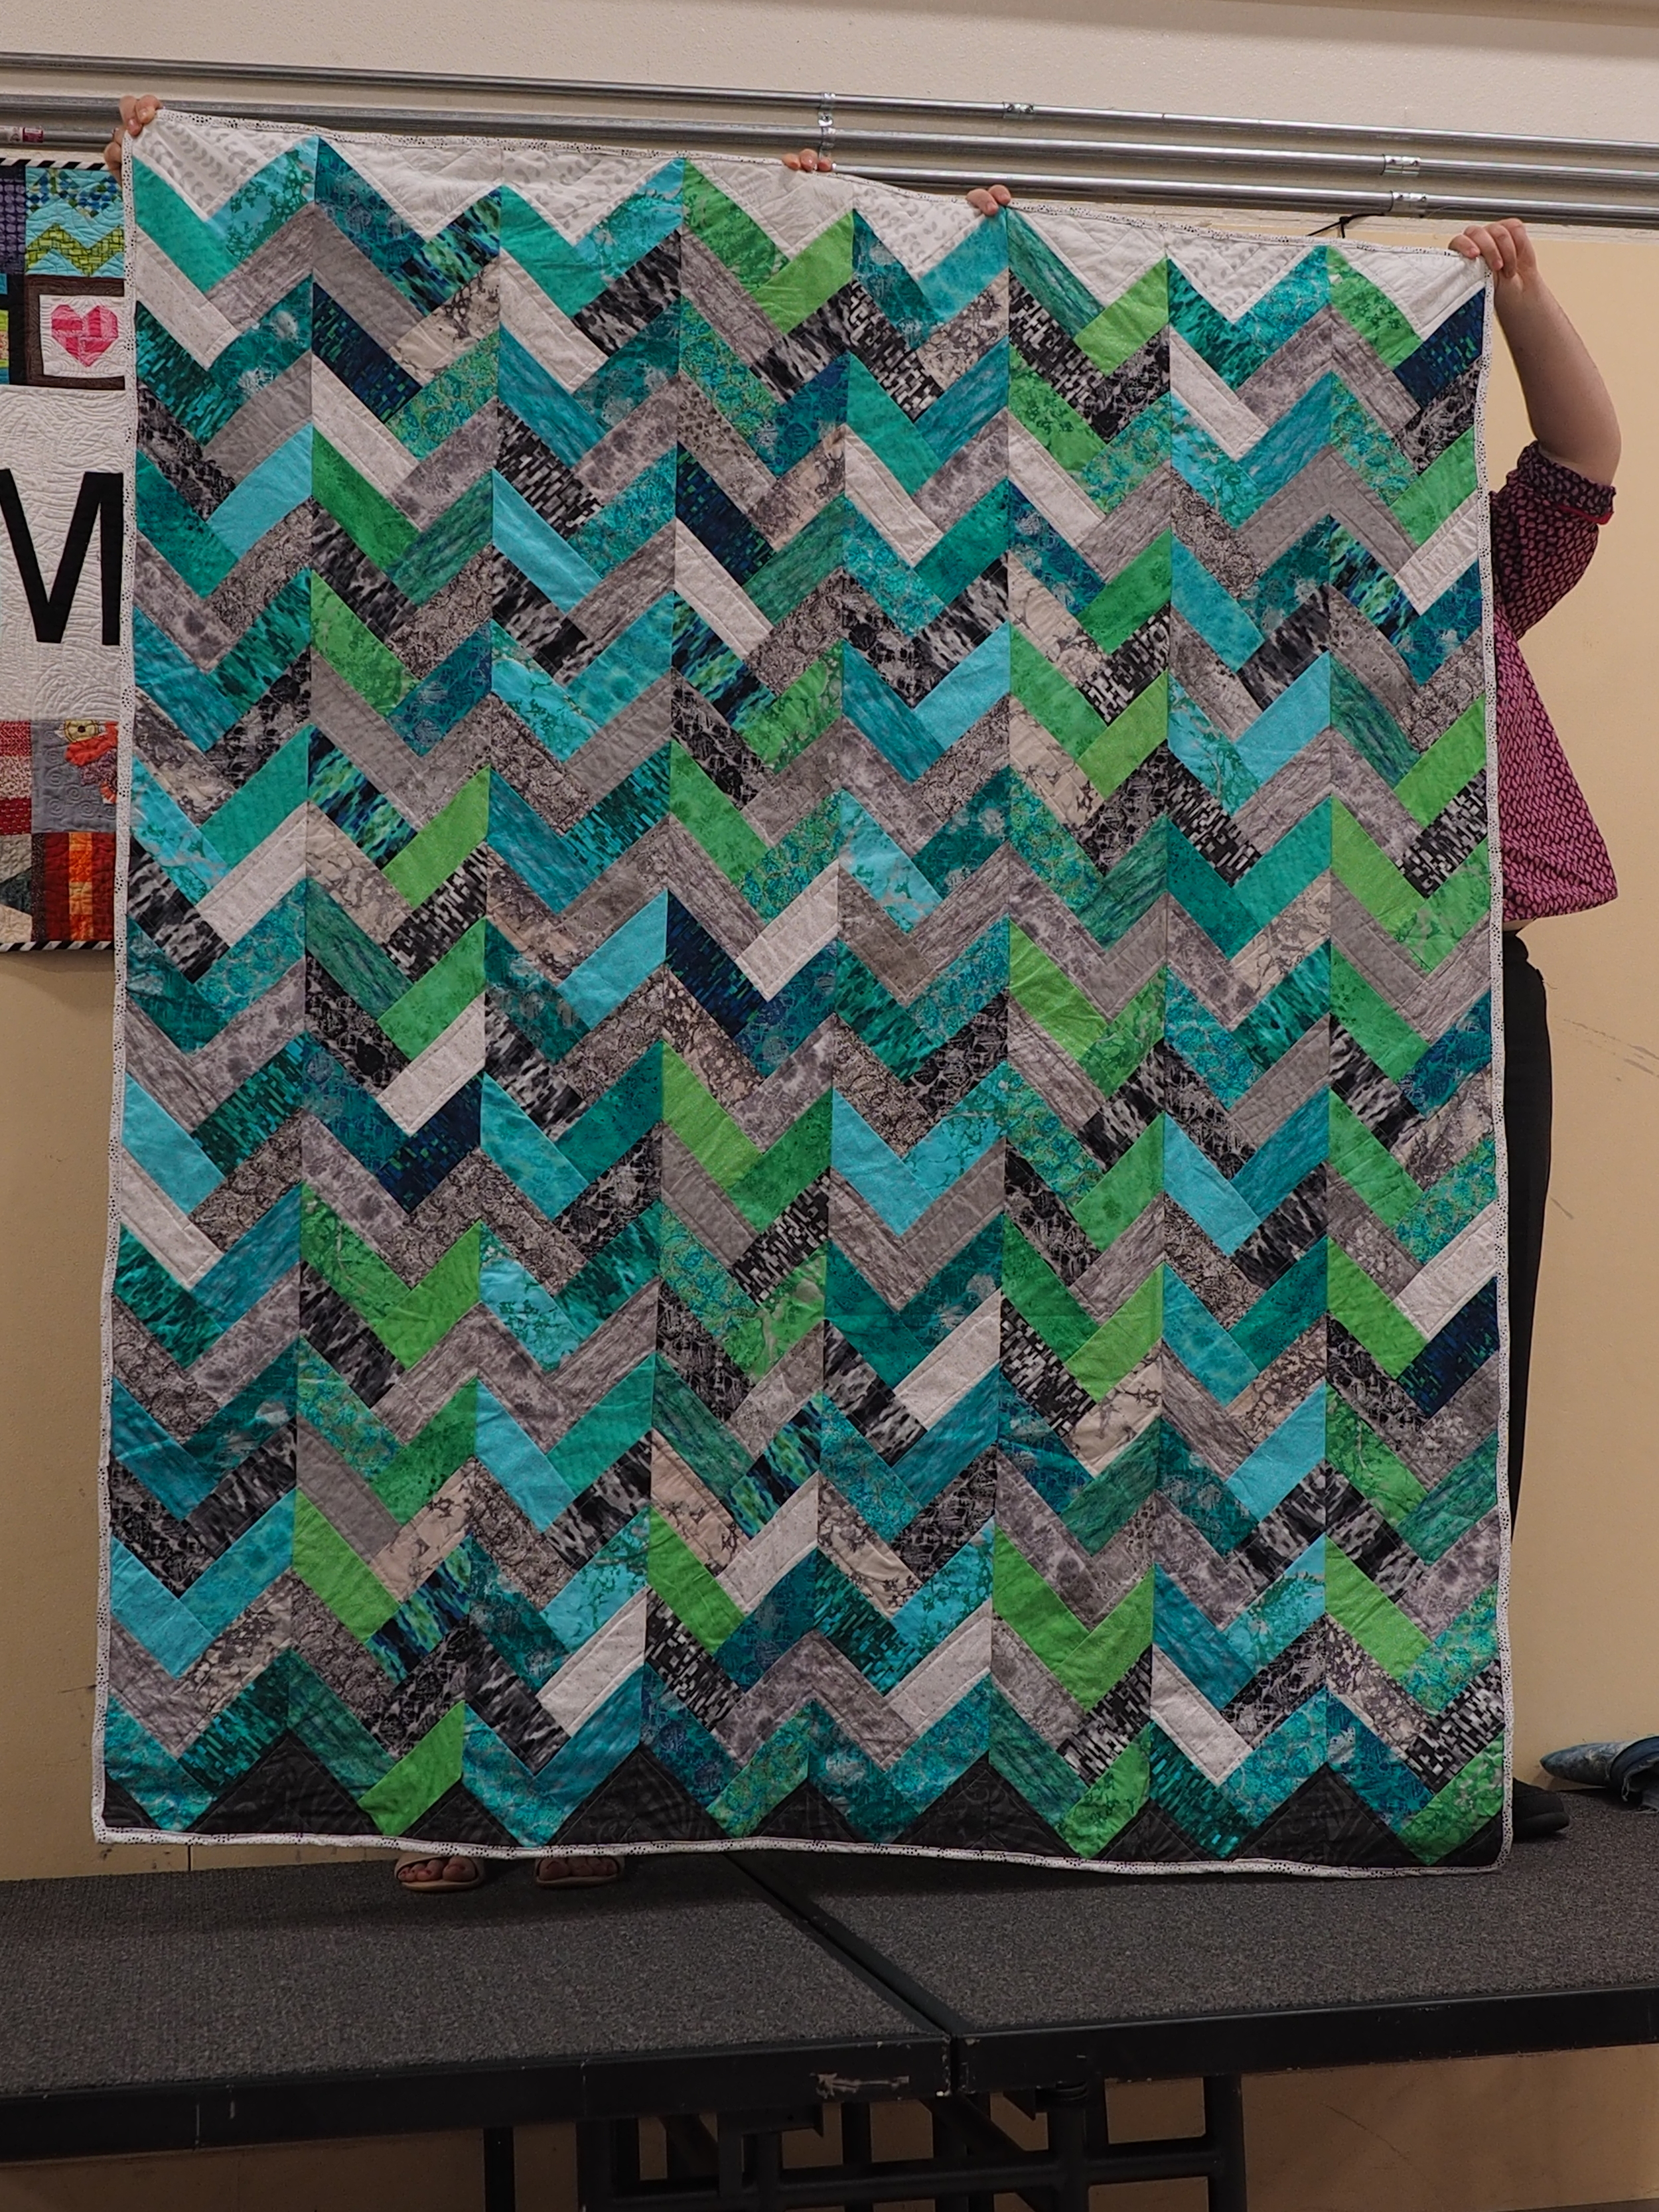  Sam Richards  Peaks &amp; Valleys  @sam_richards612  Pattern from the book "Seems like Scrappy" 